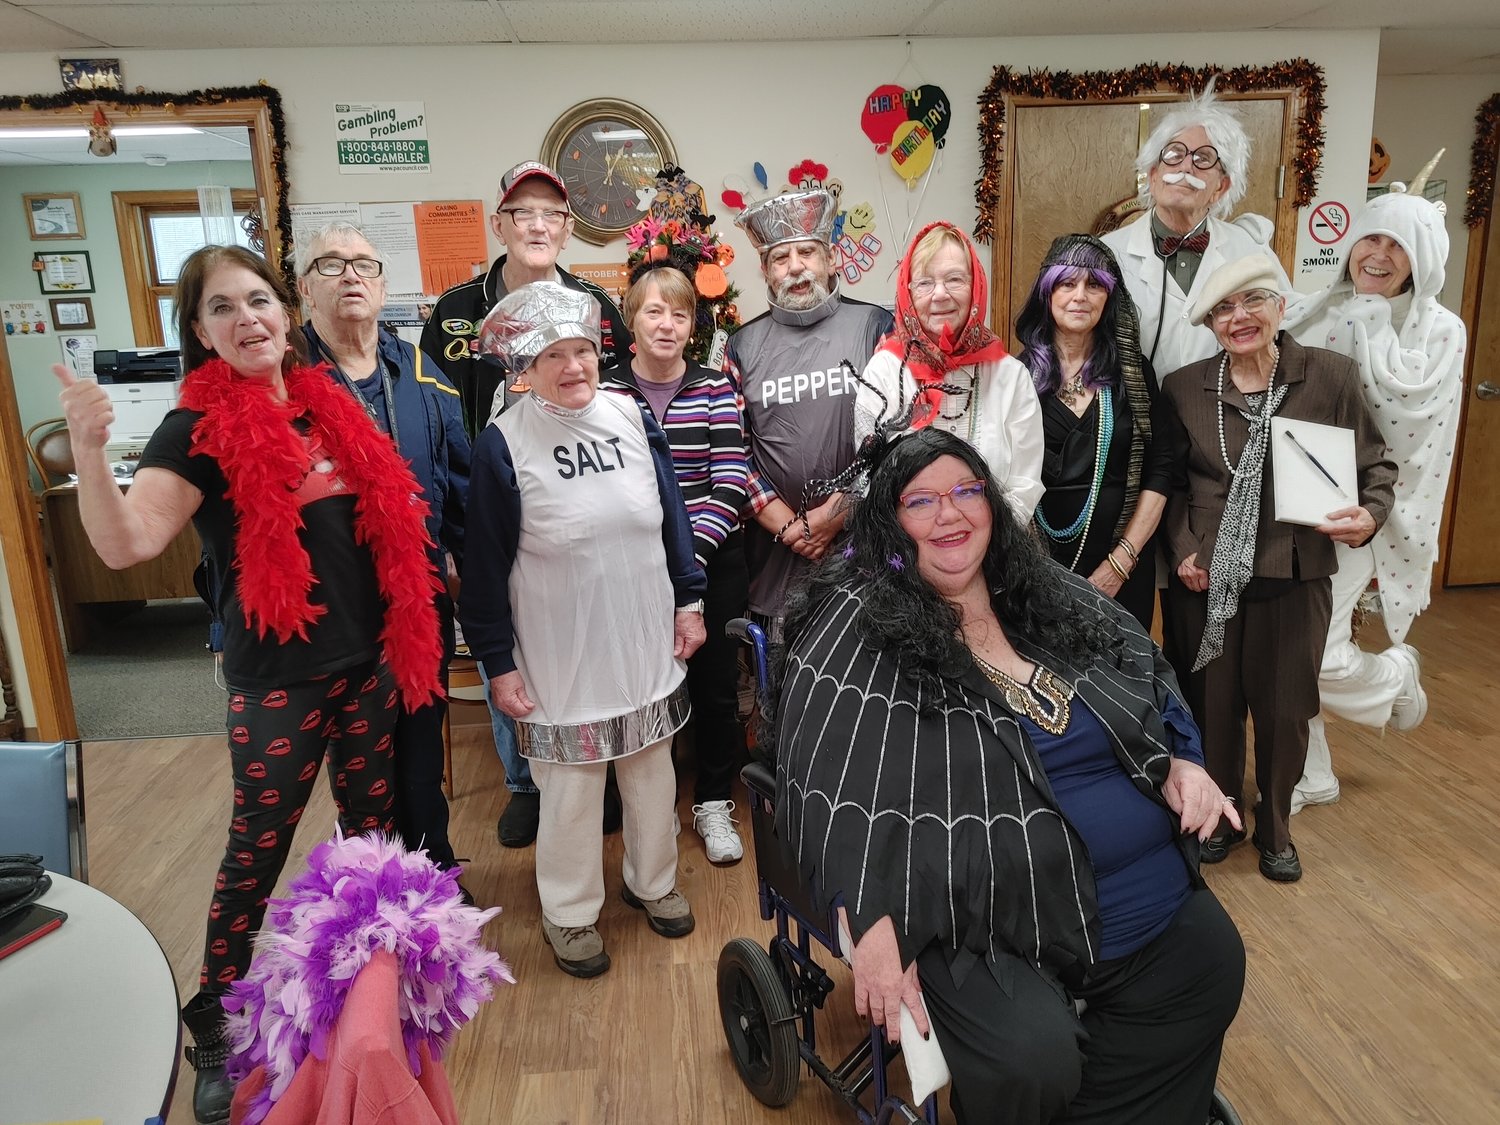 Dressed up for Halloween at the Hawley Senior Center.